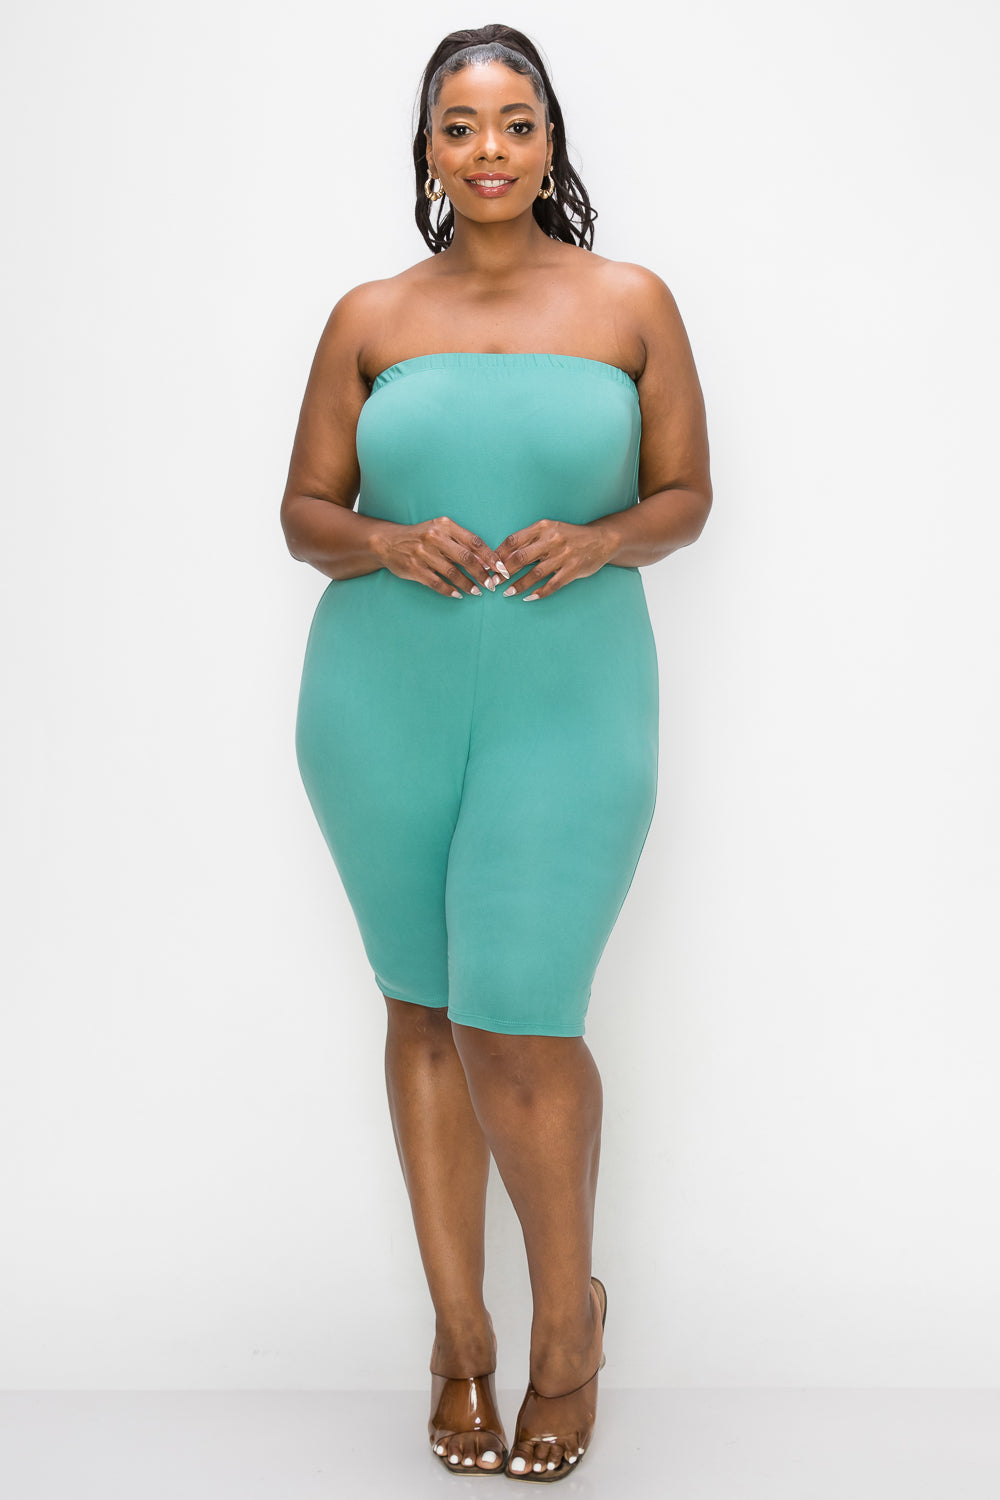 livd L I V D women's plus size boutique bodycon rompear in teal